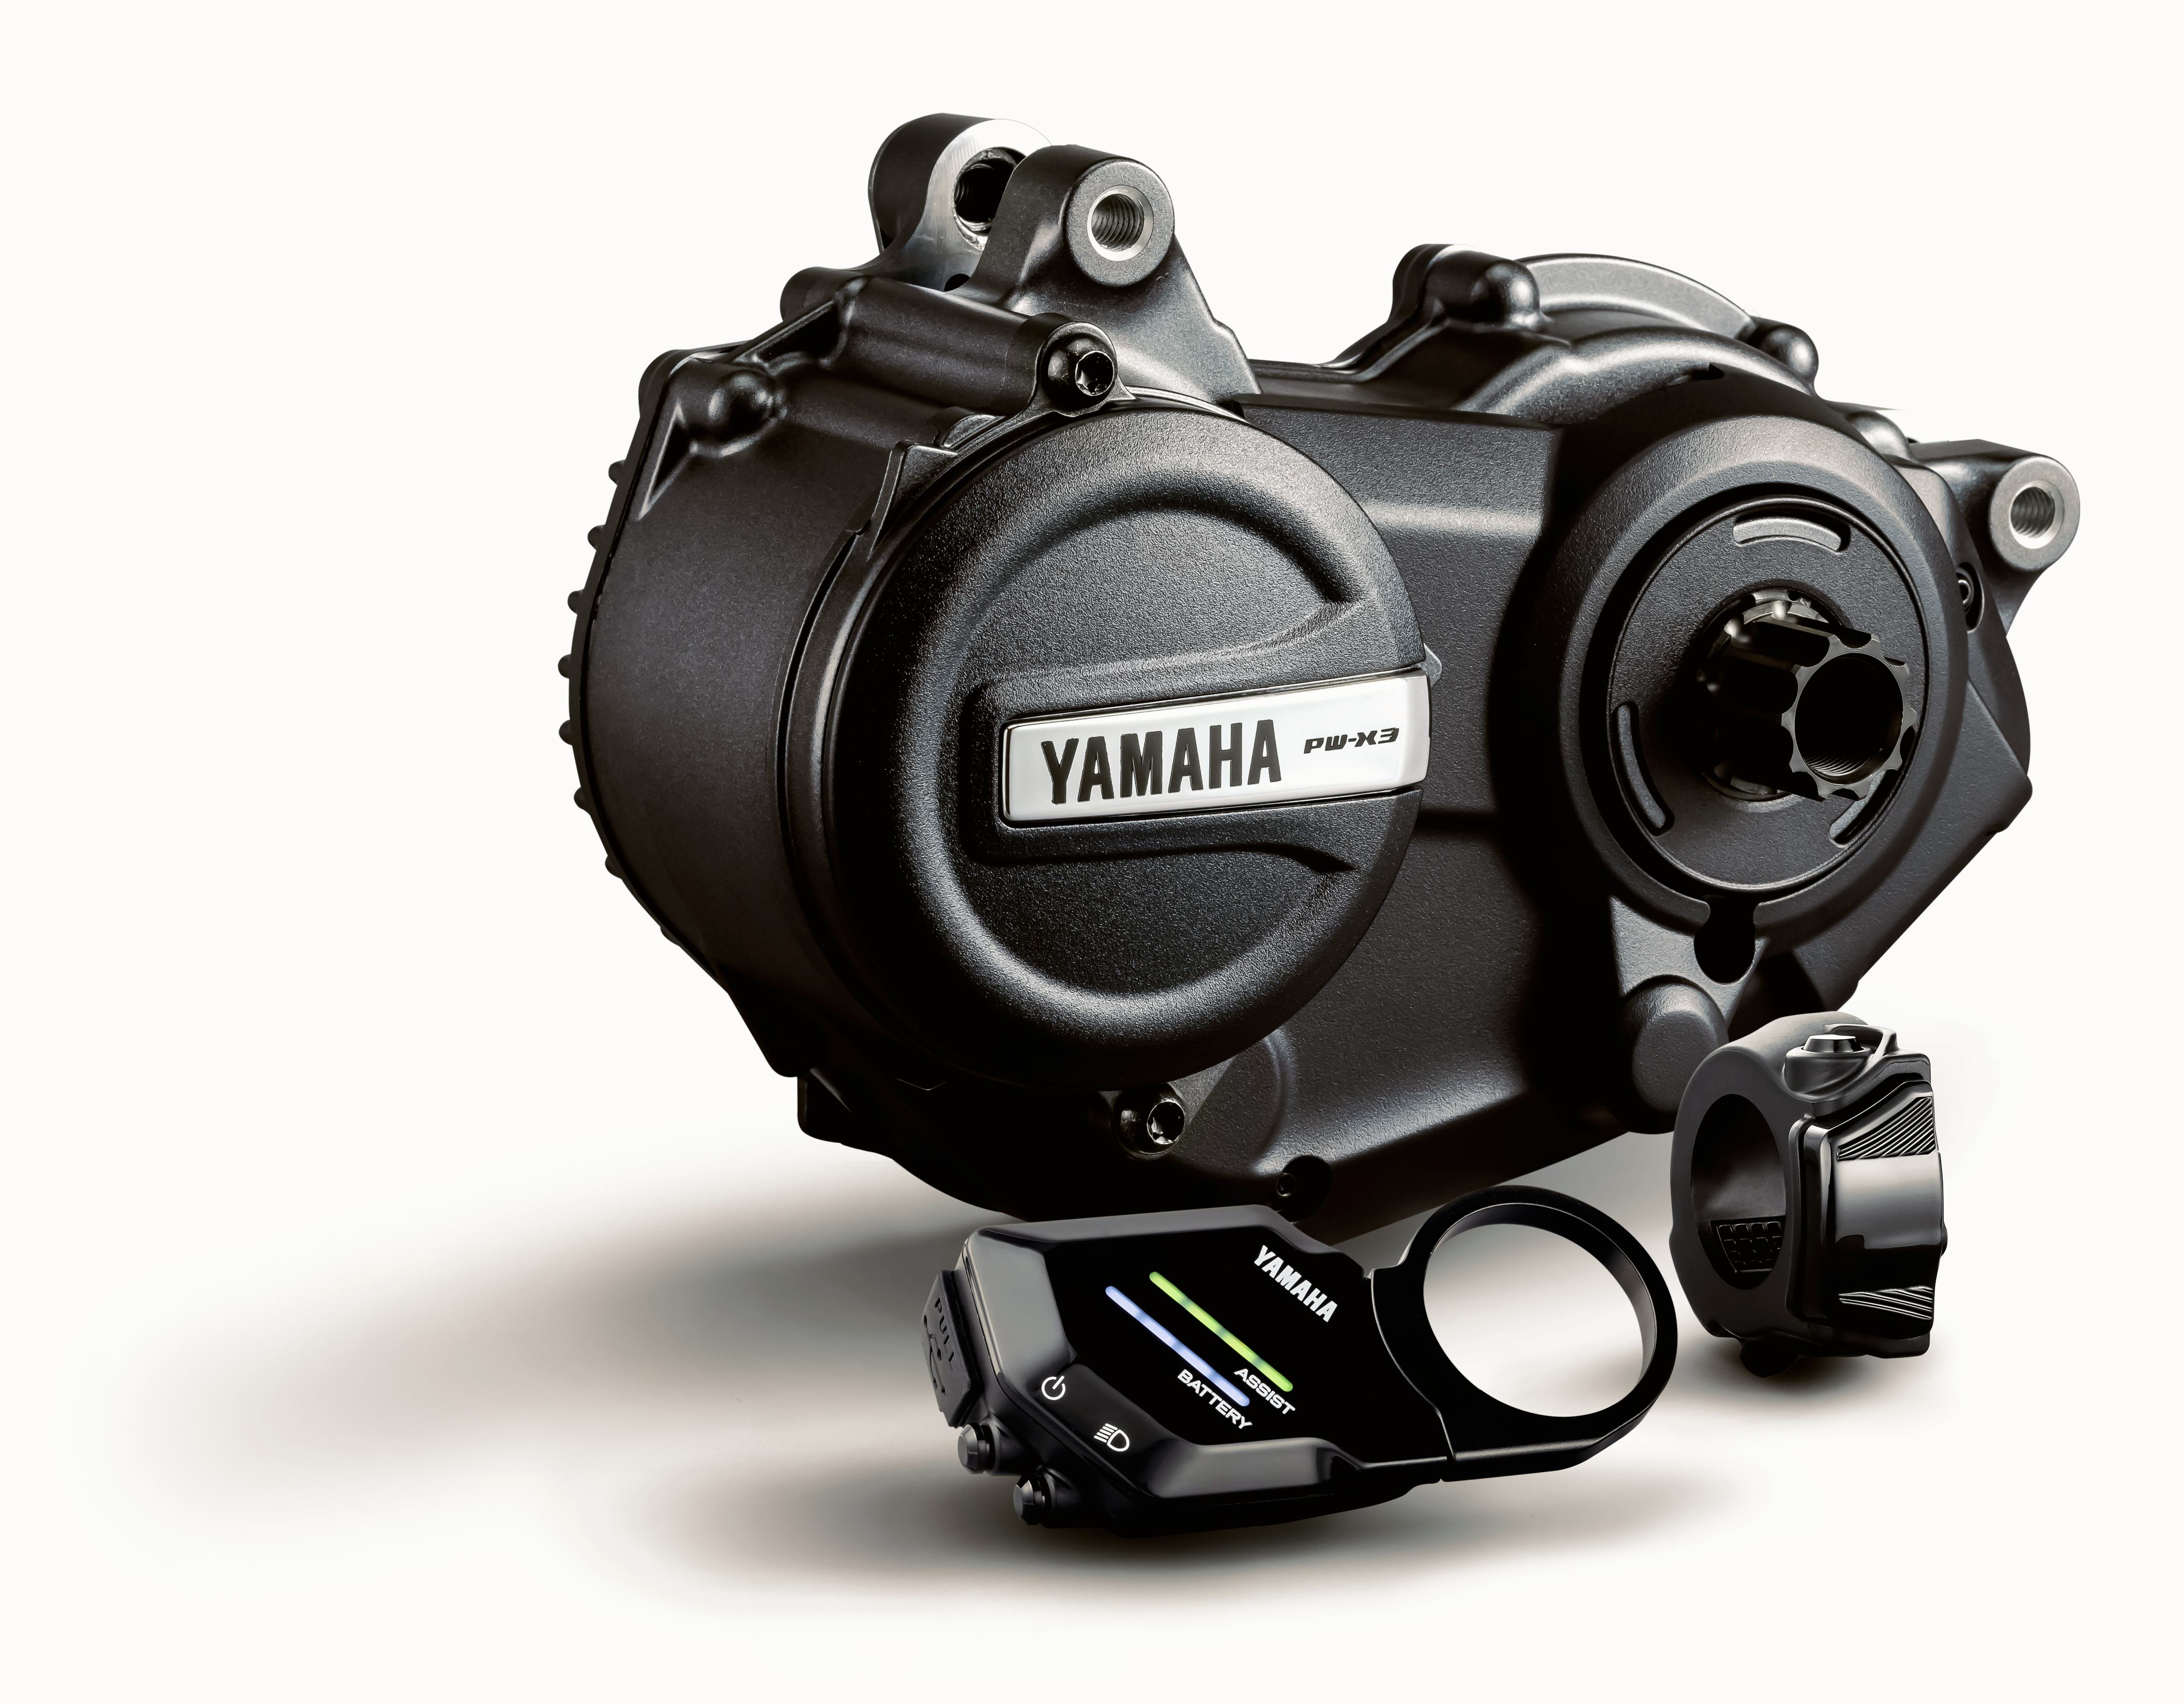 The new PW-X3 is Yamaha’s smallest, lightest and most powerful drive unit